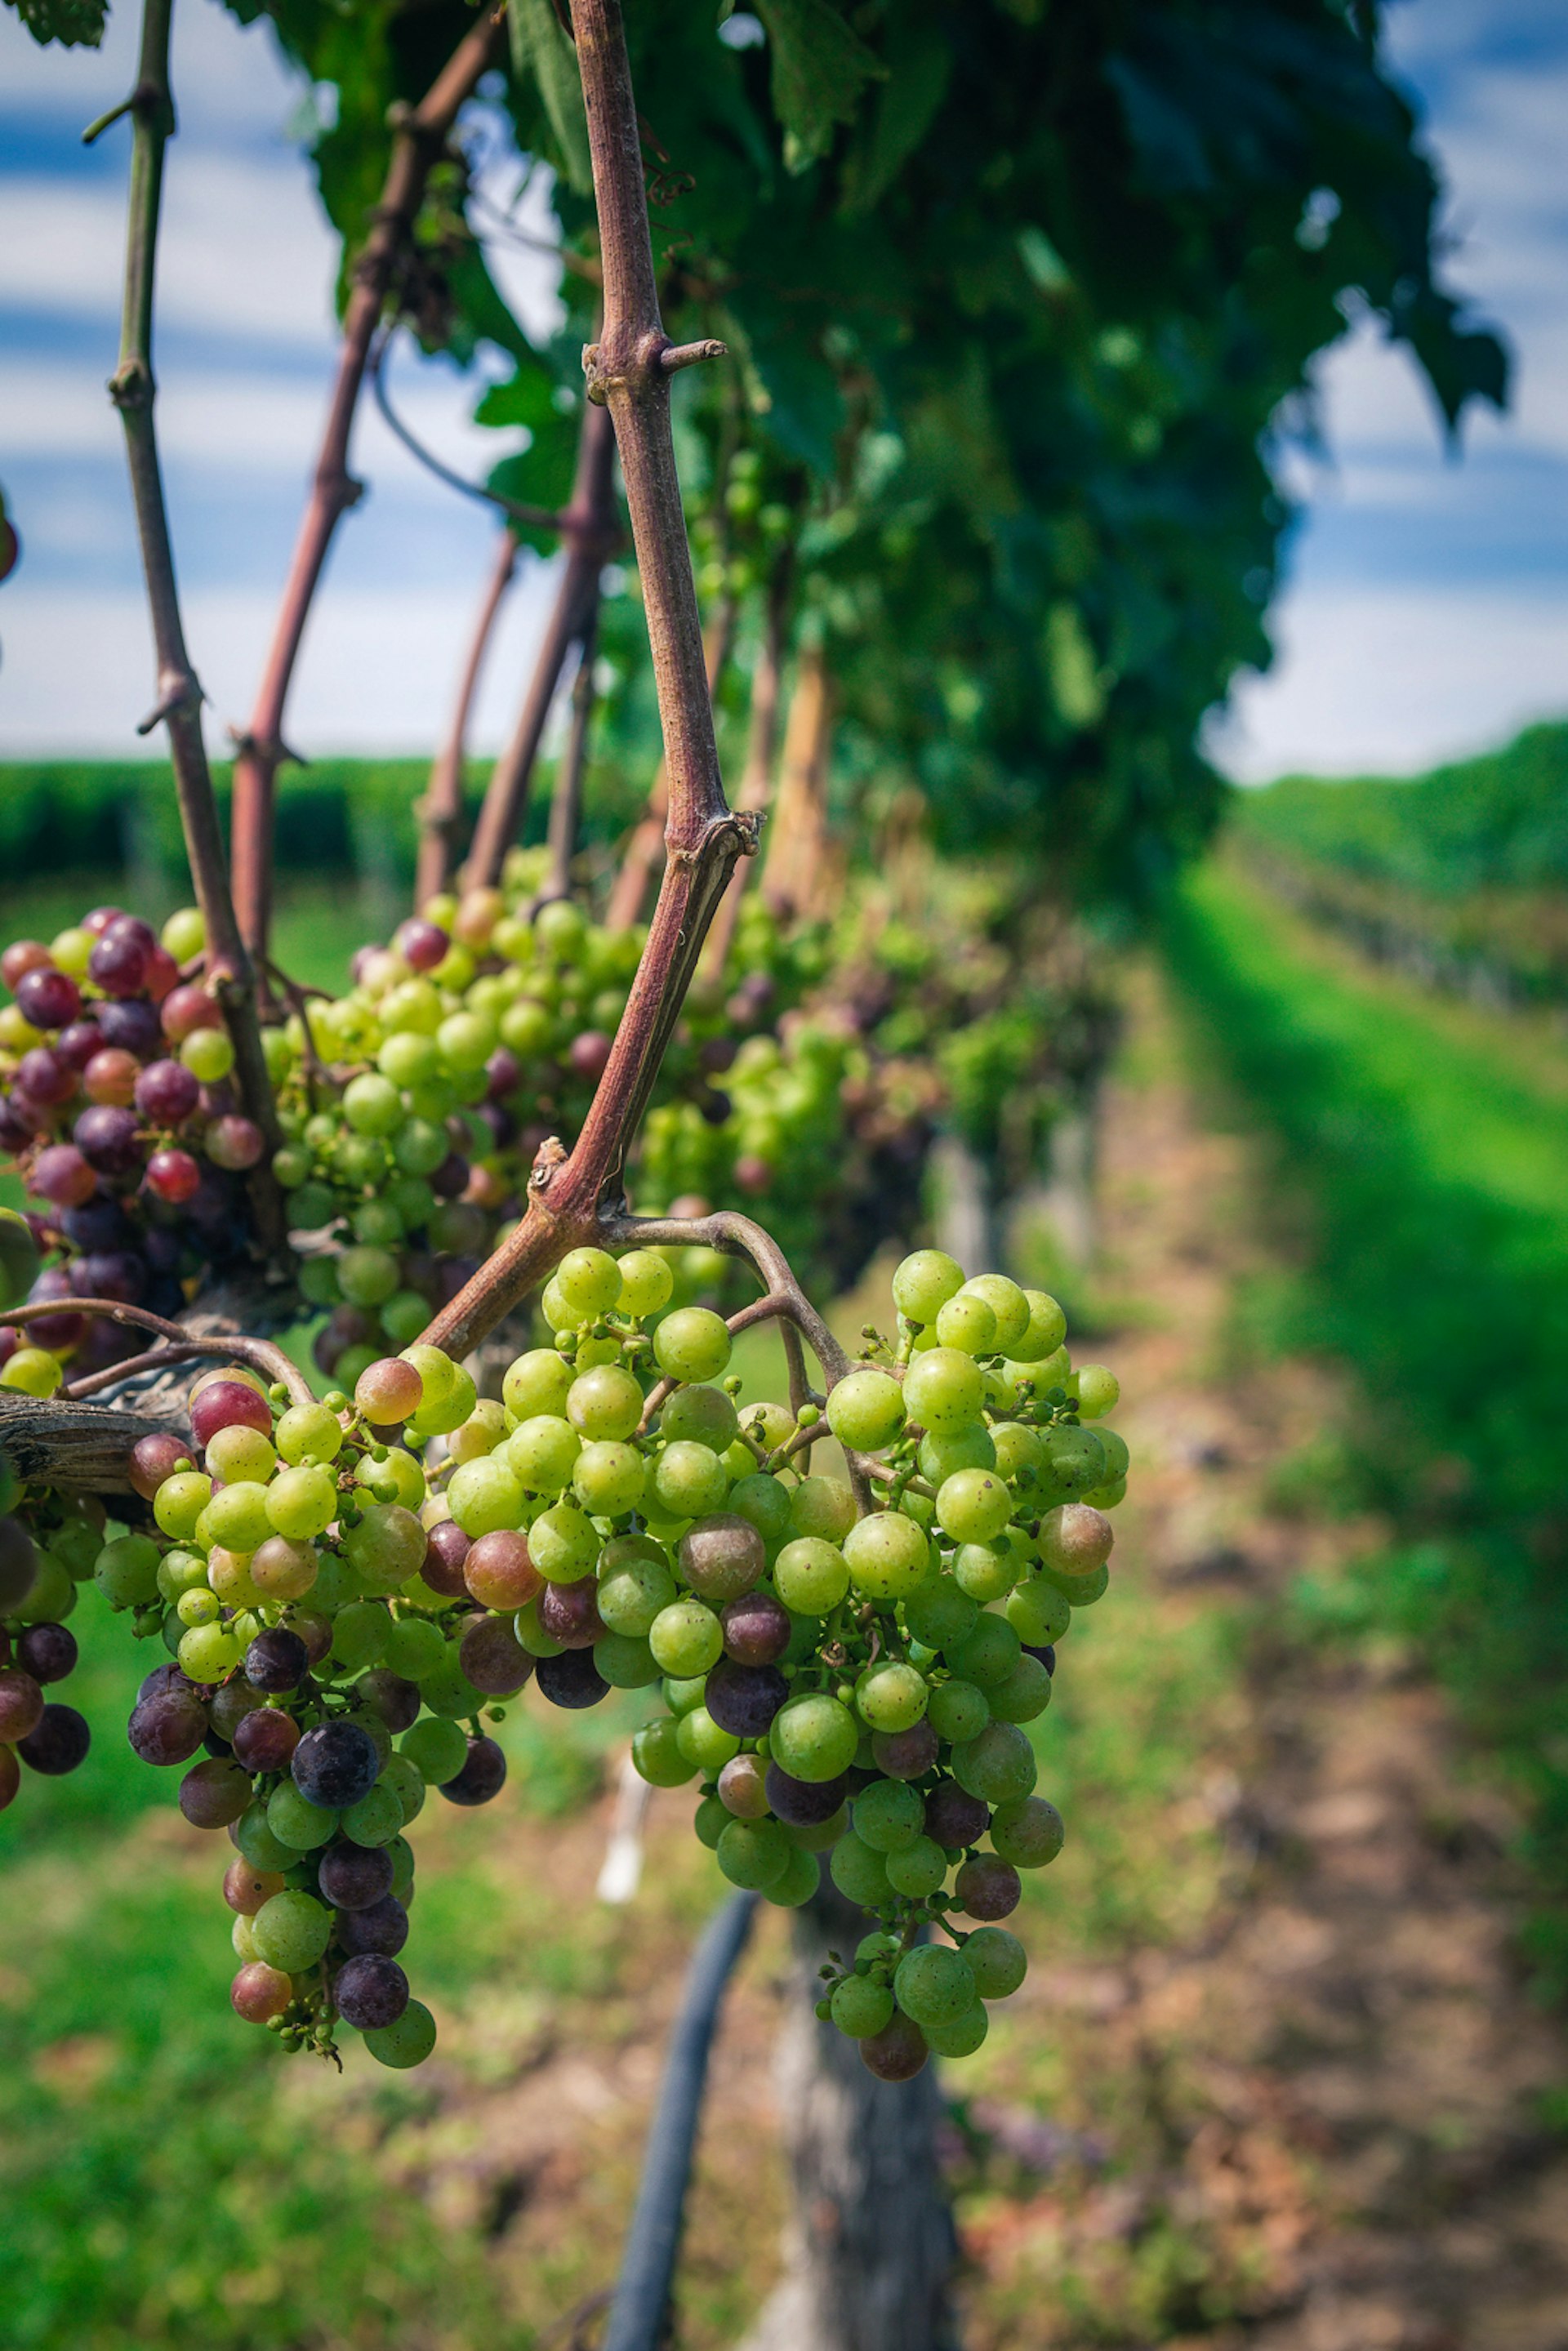 Grapes growing on a vine at a vineyard; summer trips from New York City